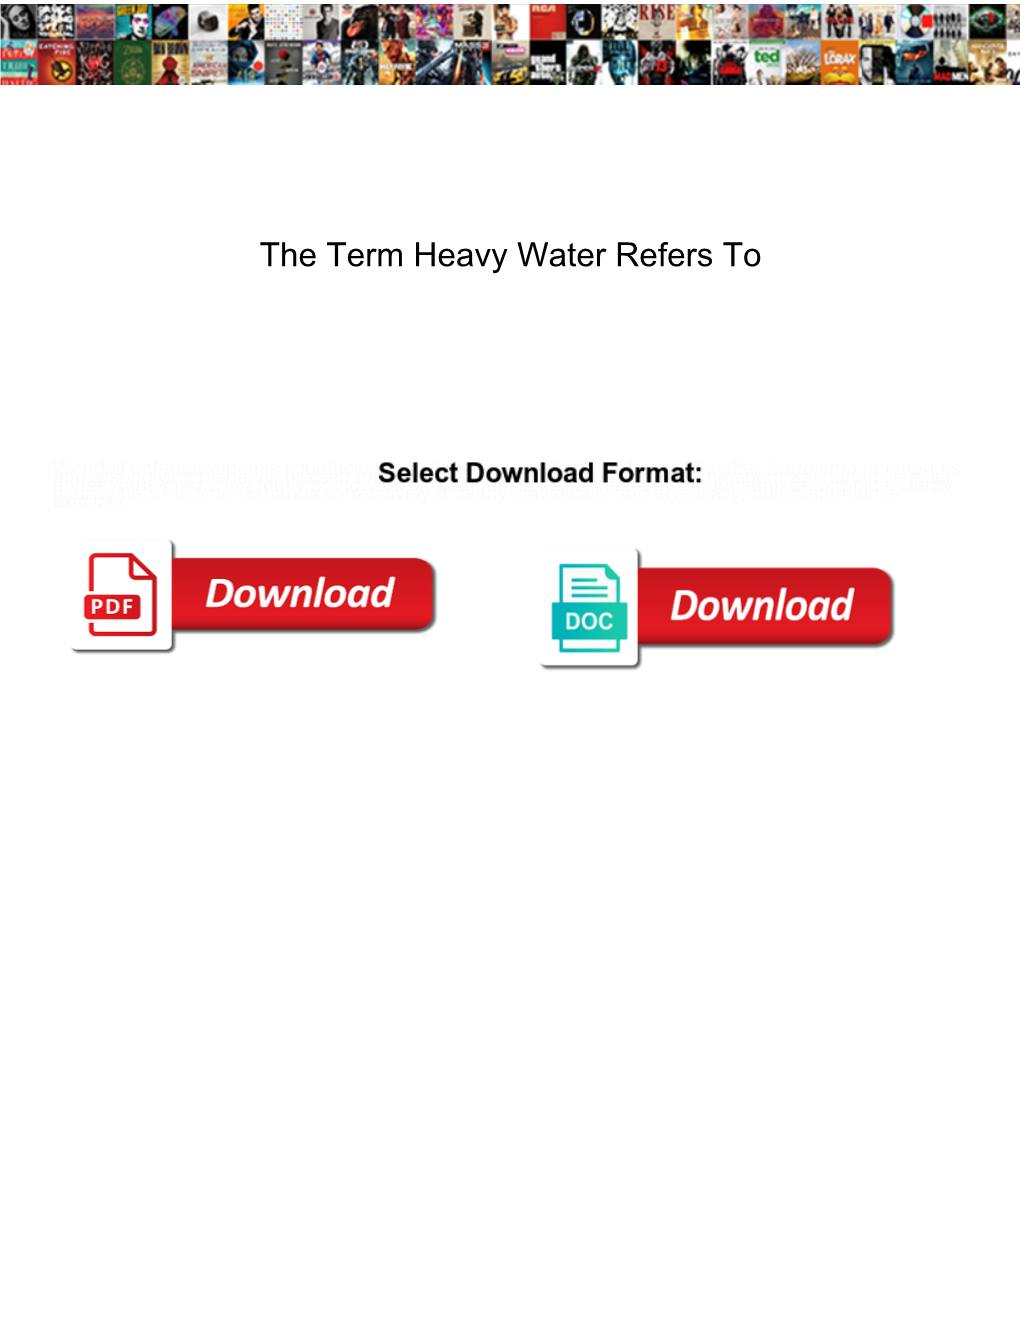 The Term Heavy Water Refers To